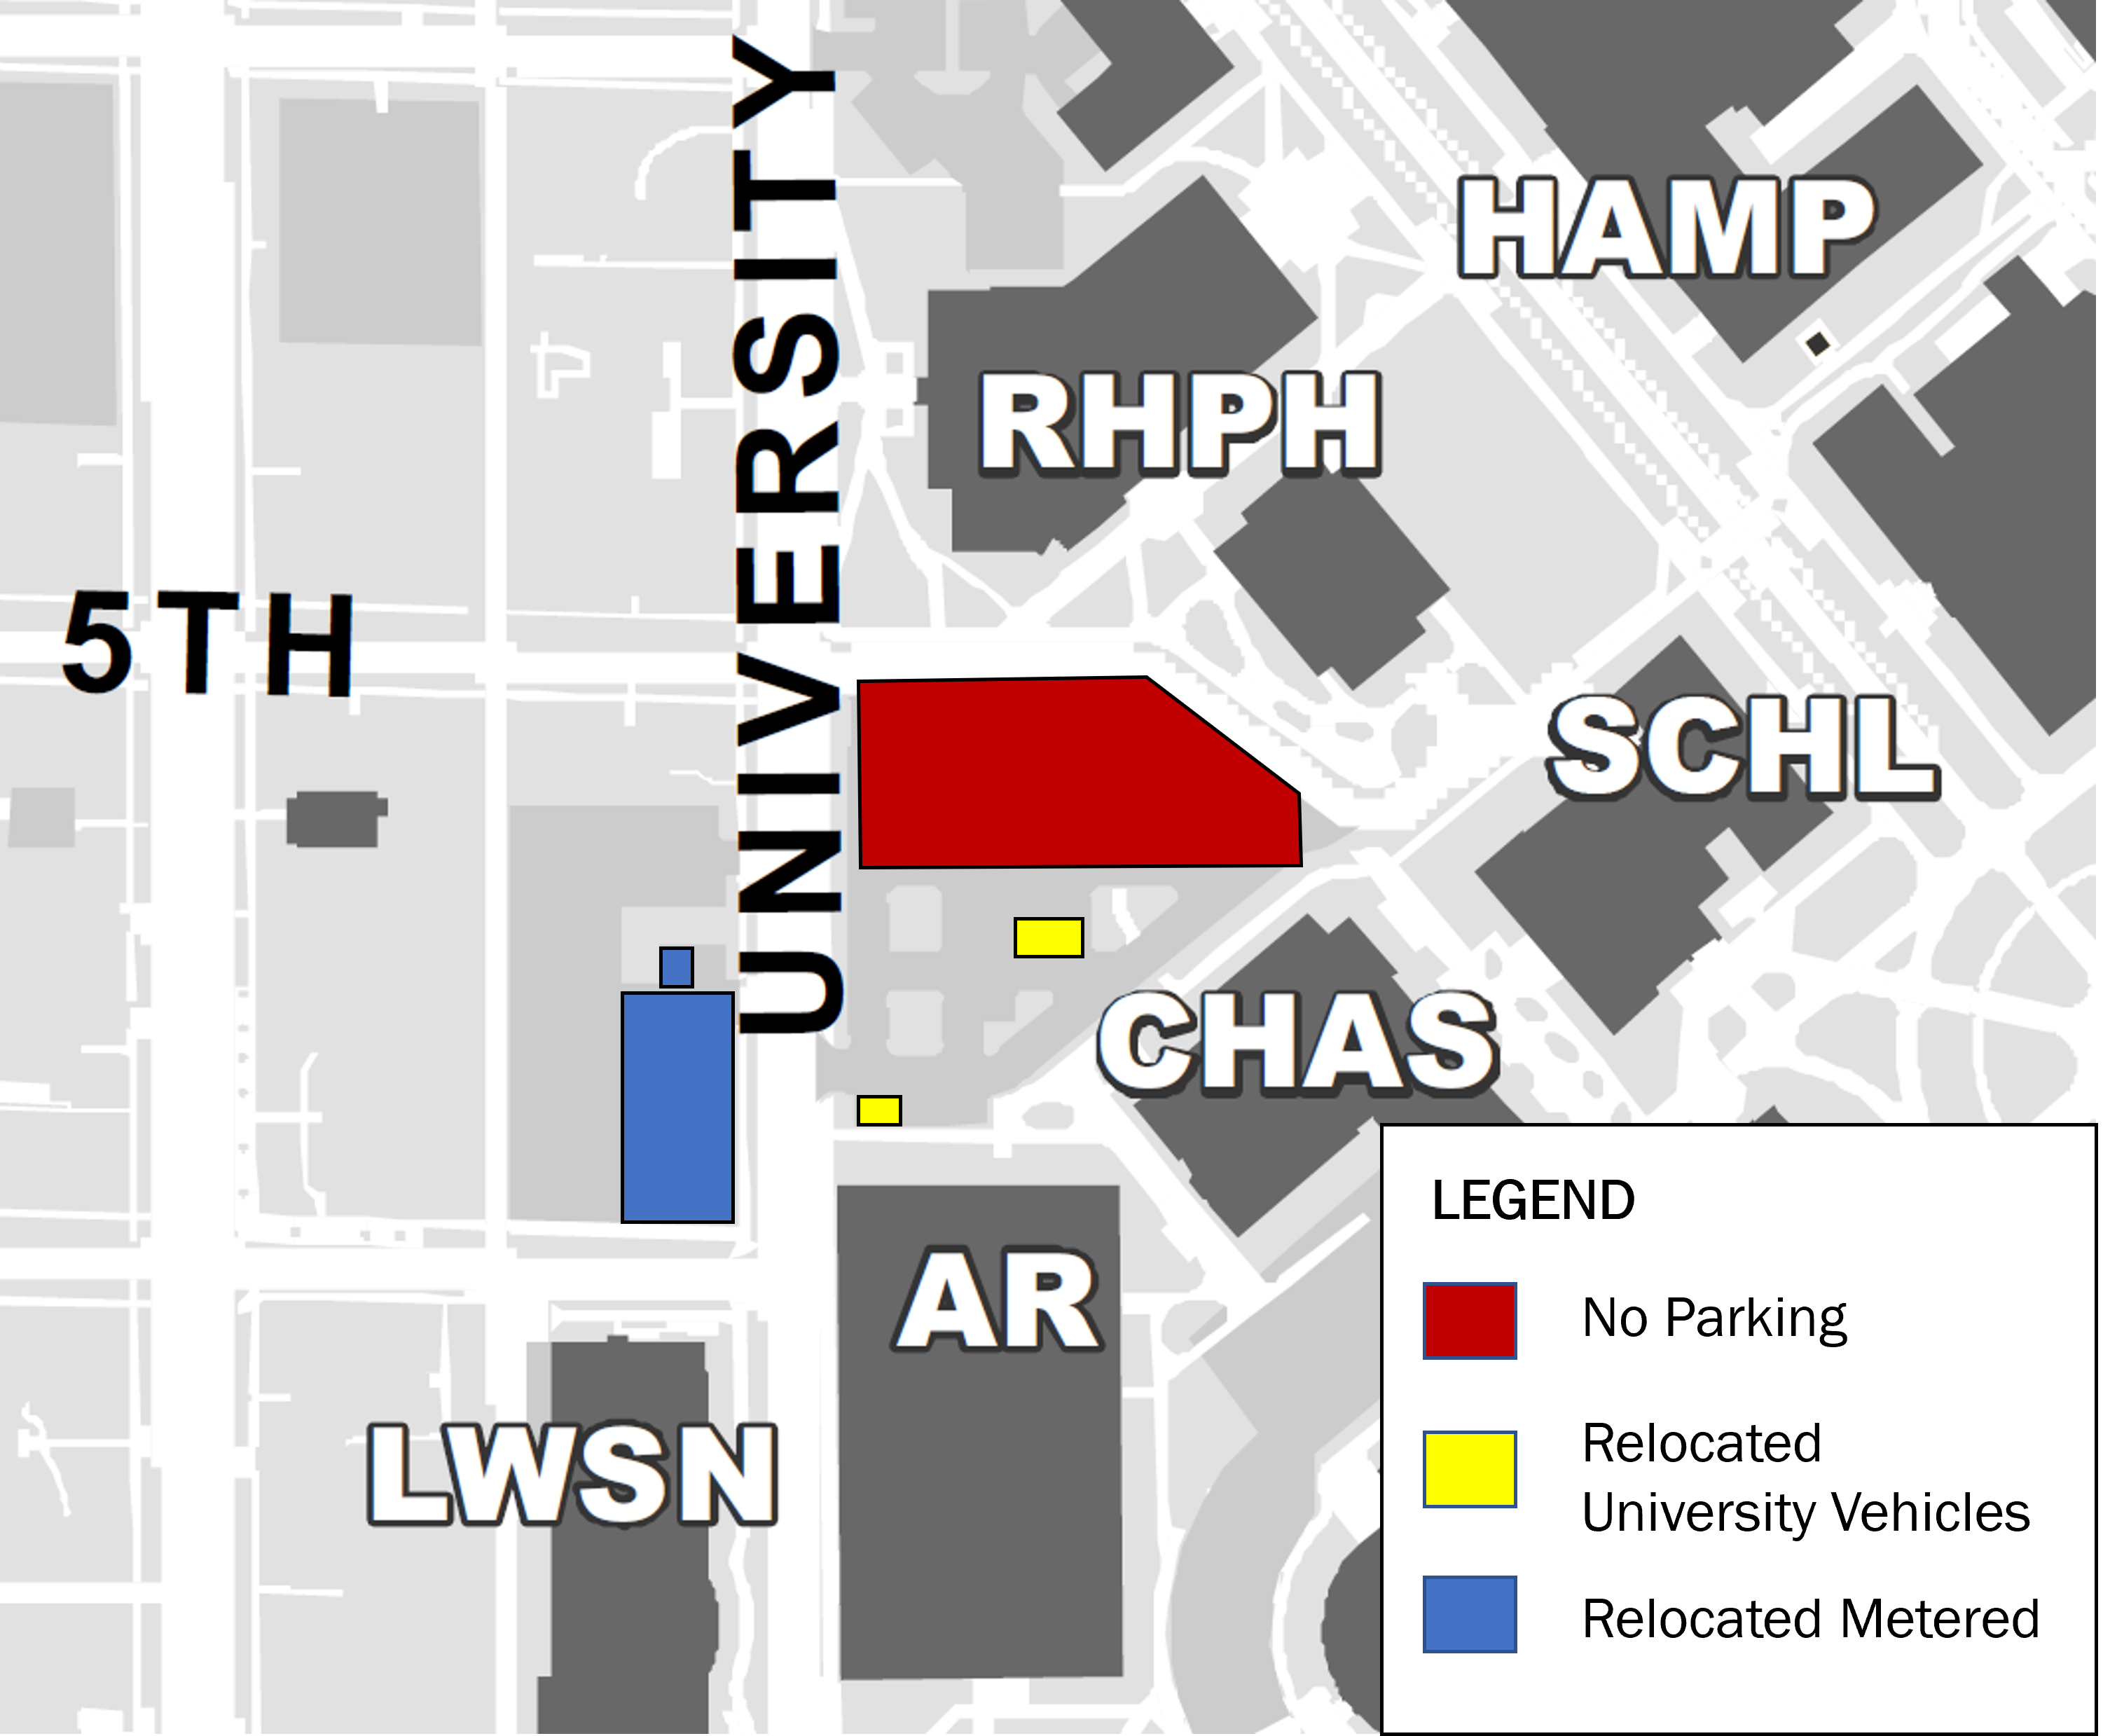 Parking changes to lots north of the Armory, Lawson Computer Science Building